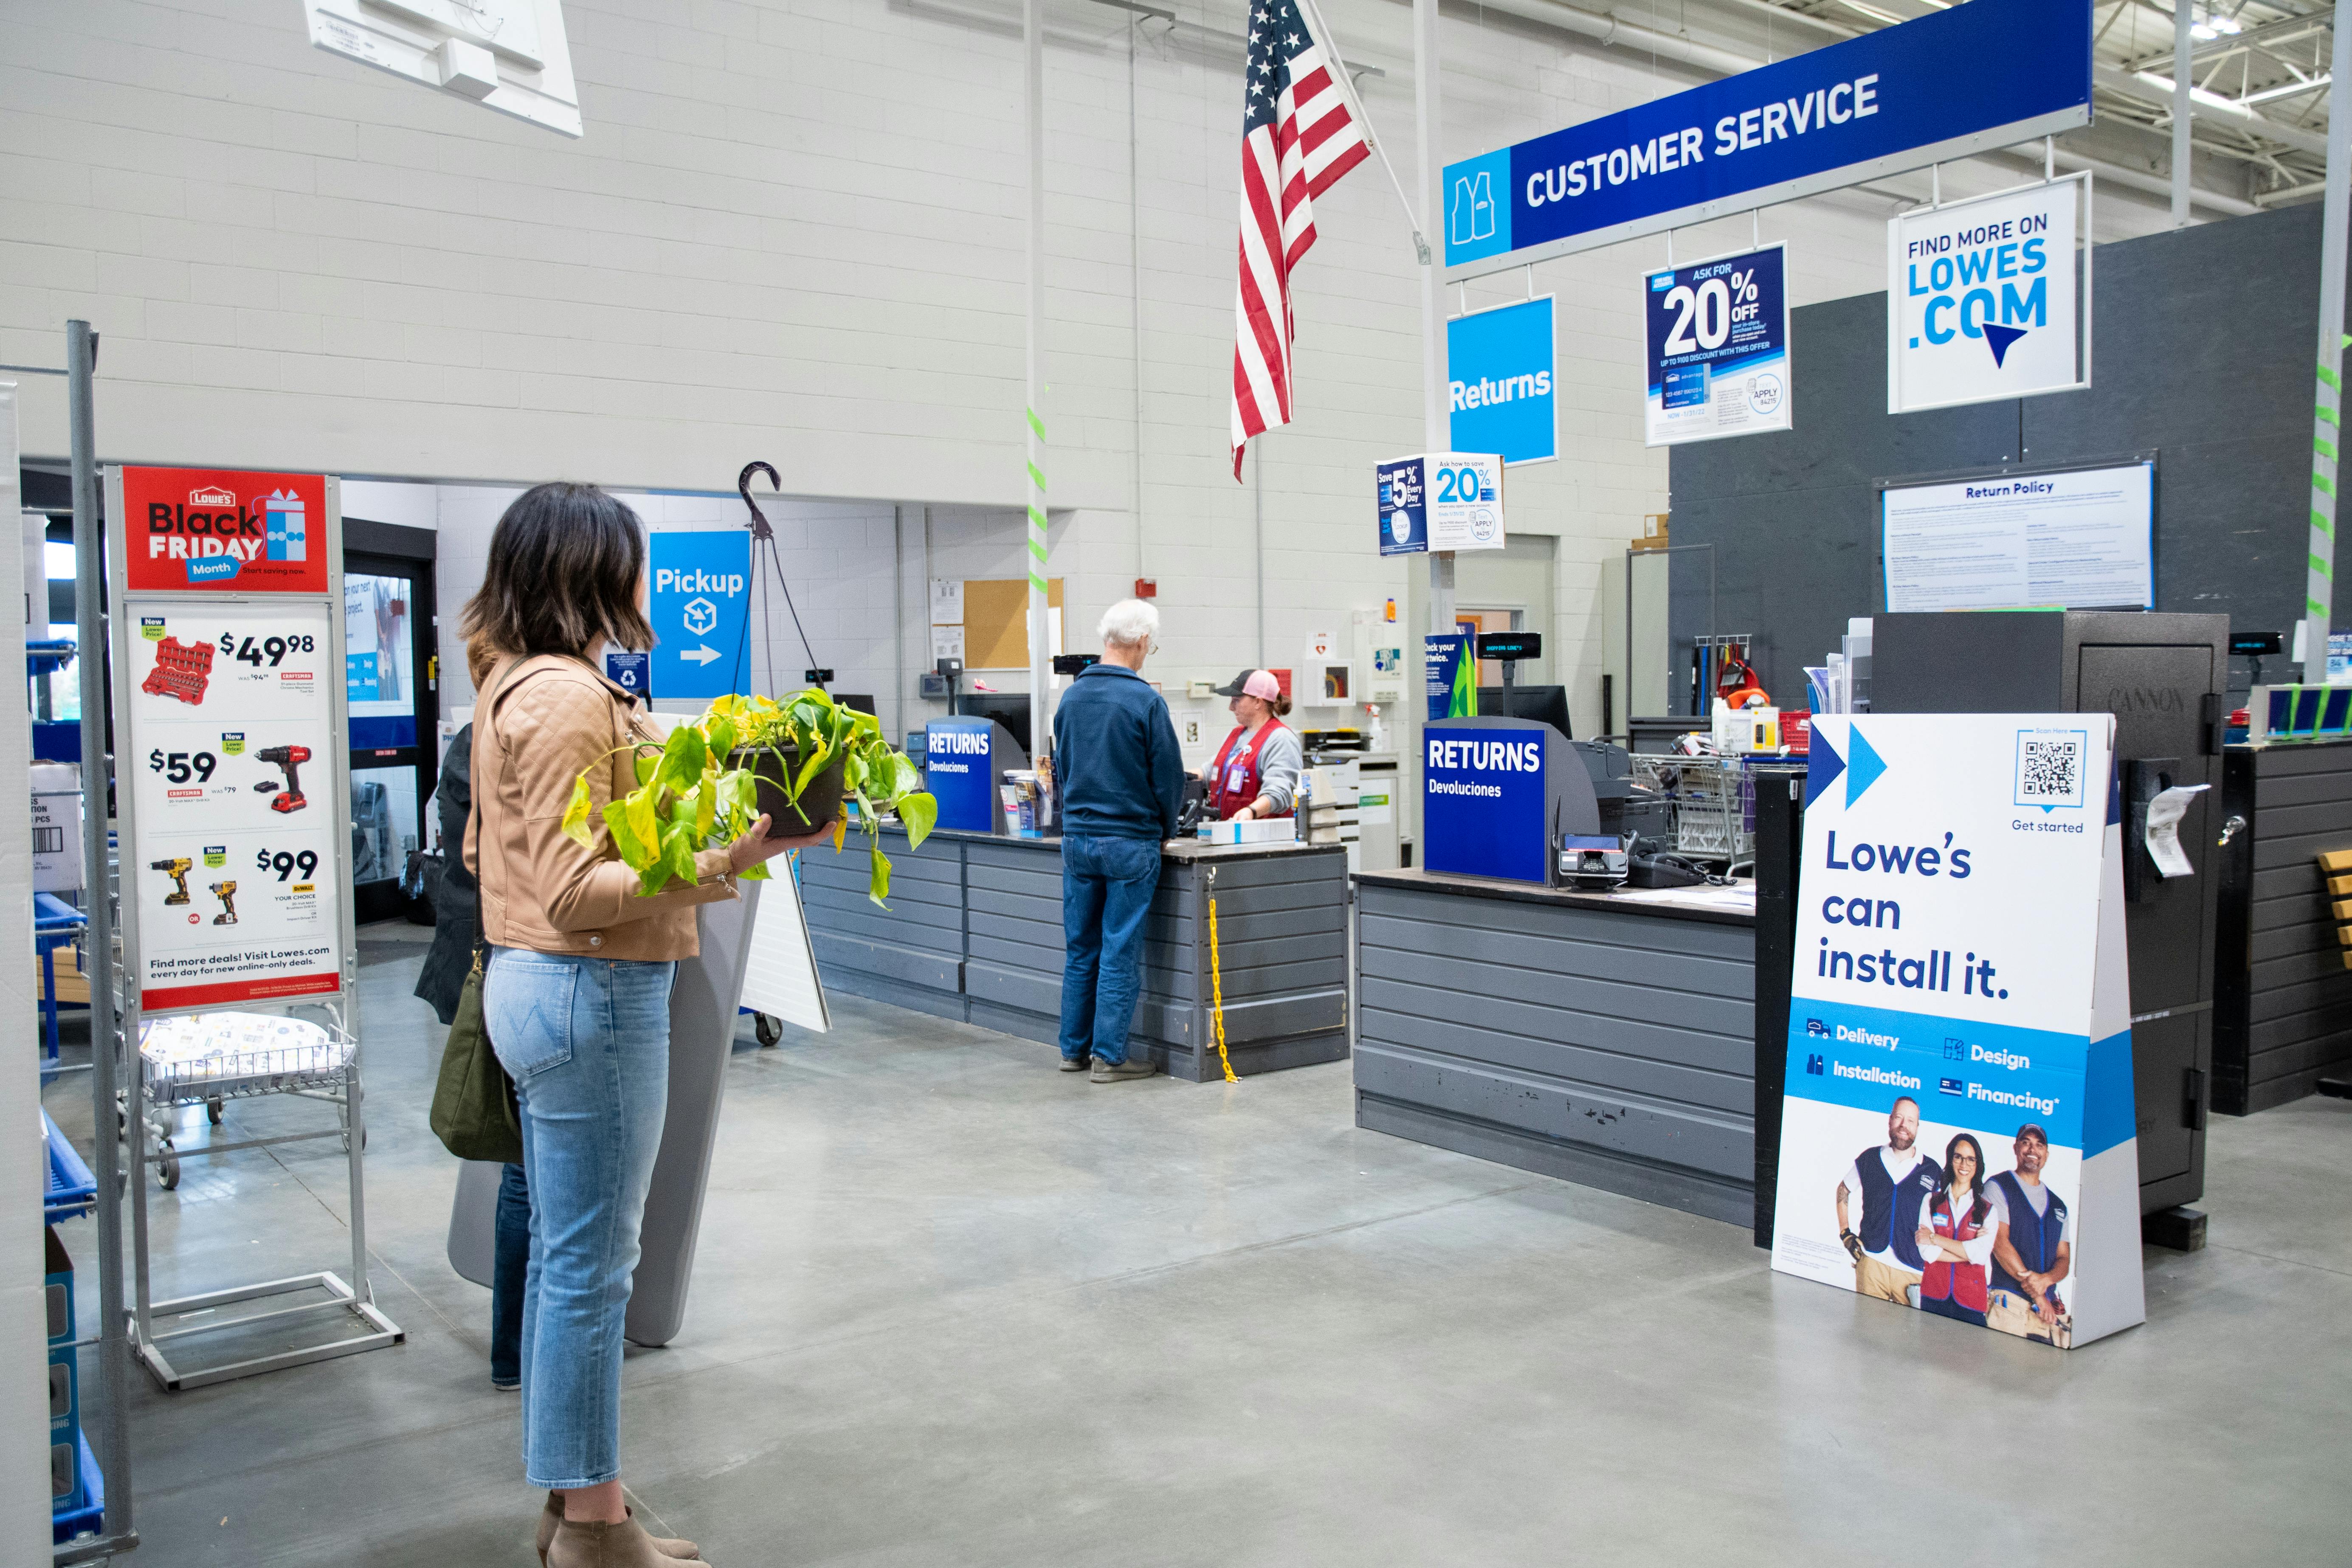 a woman standing in line holding a plant waiting to return it at Lowe's